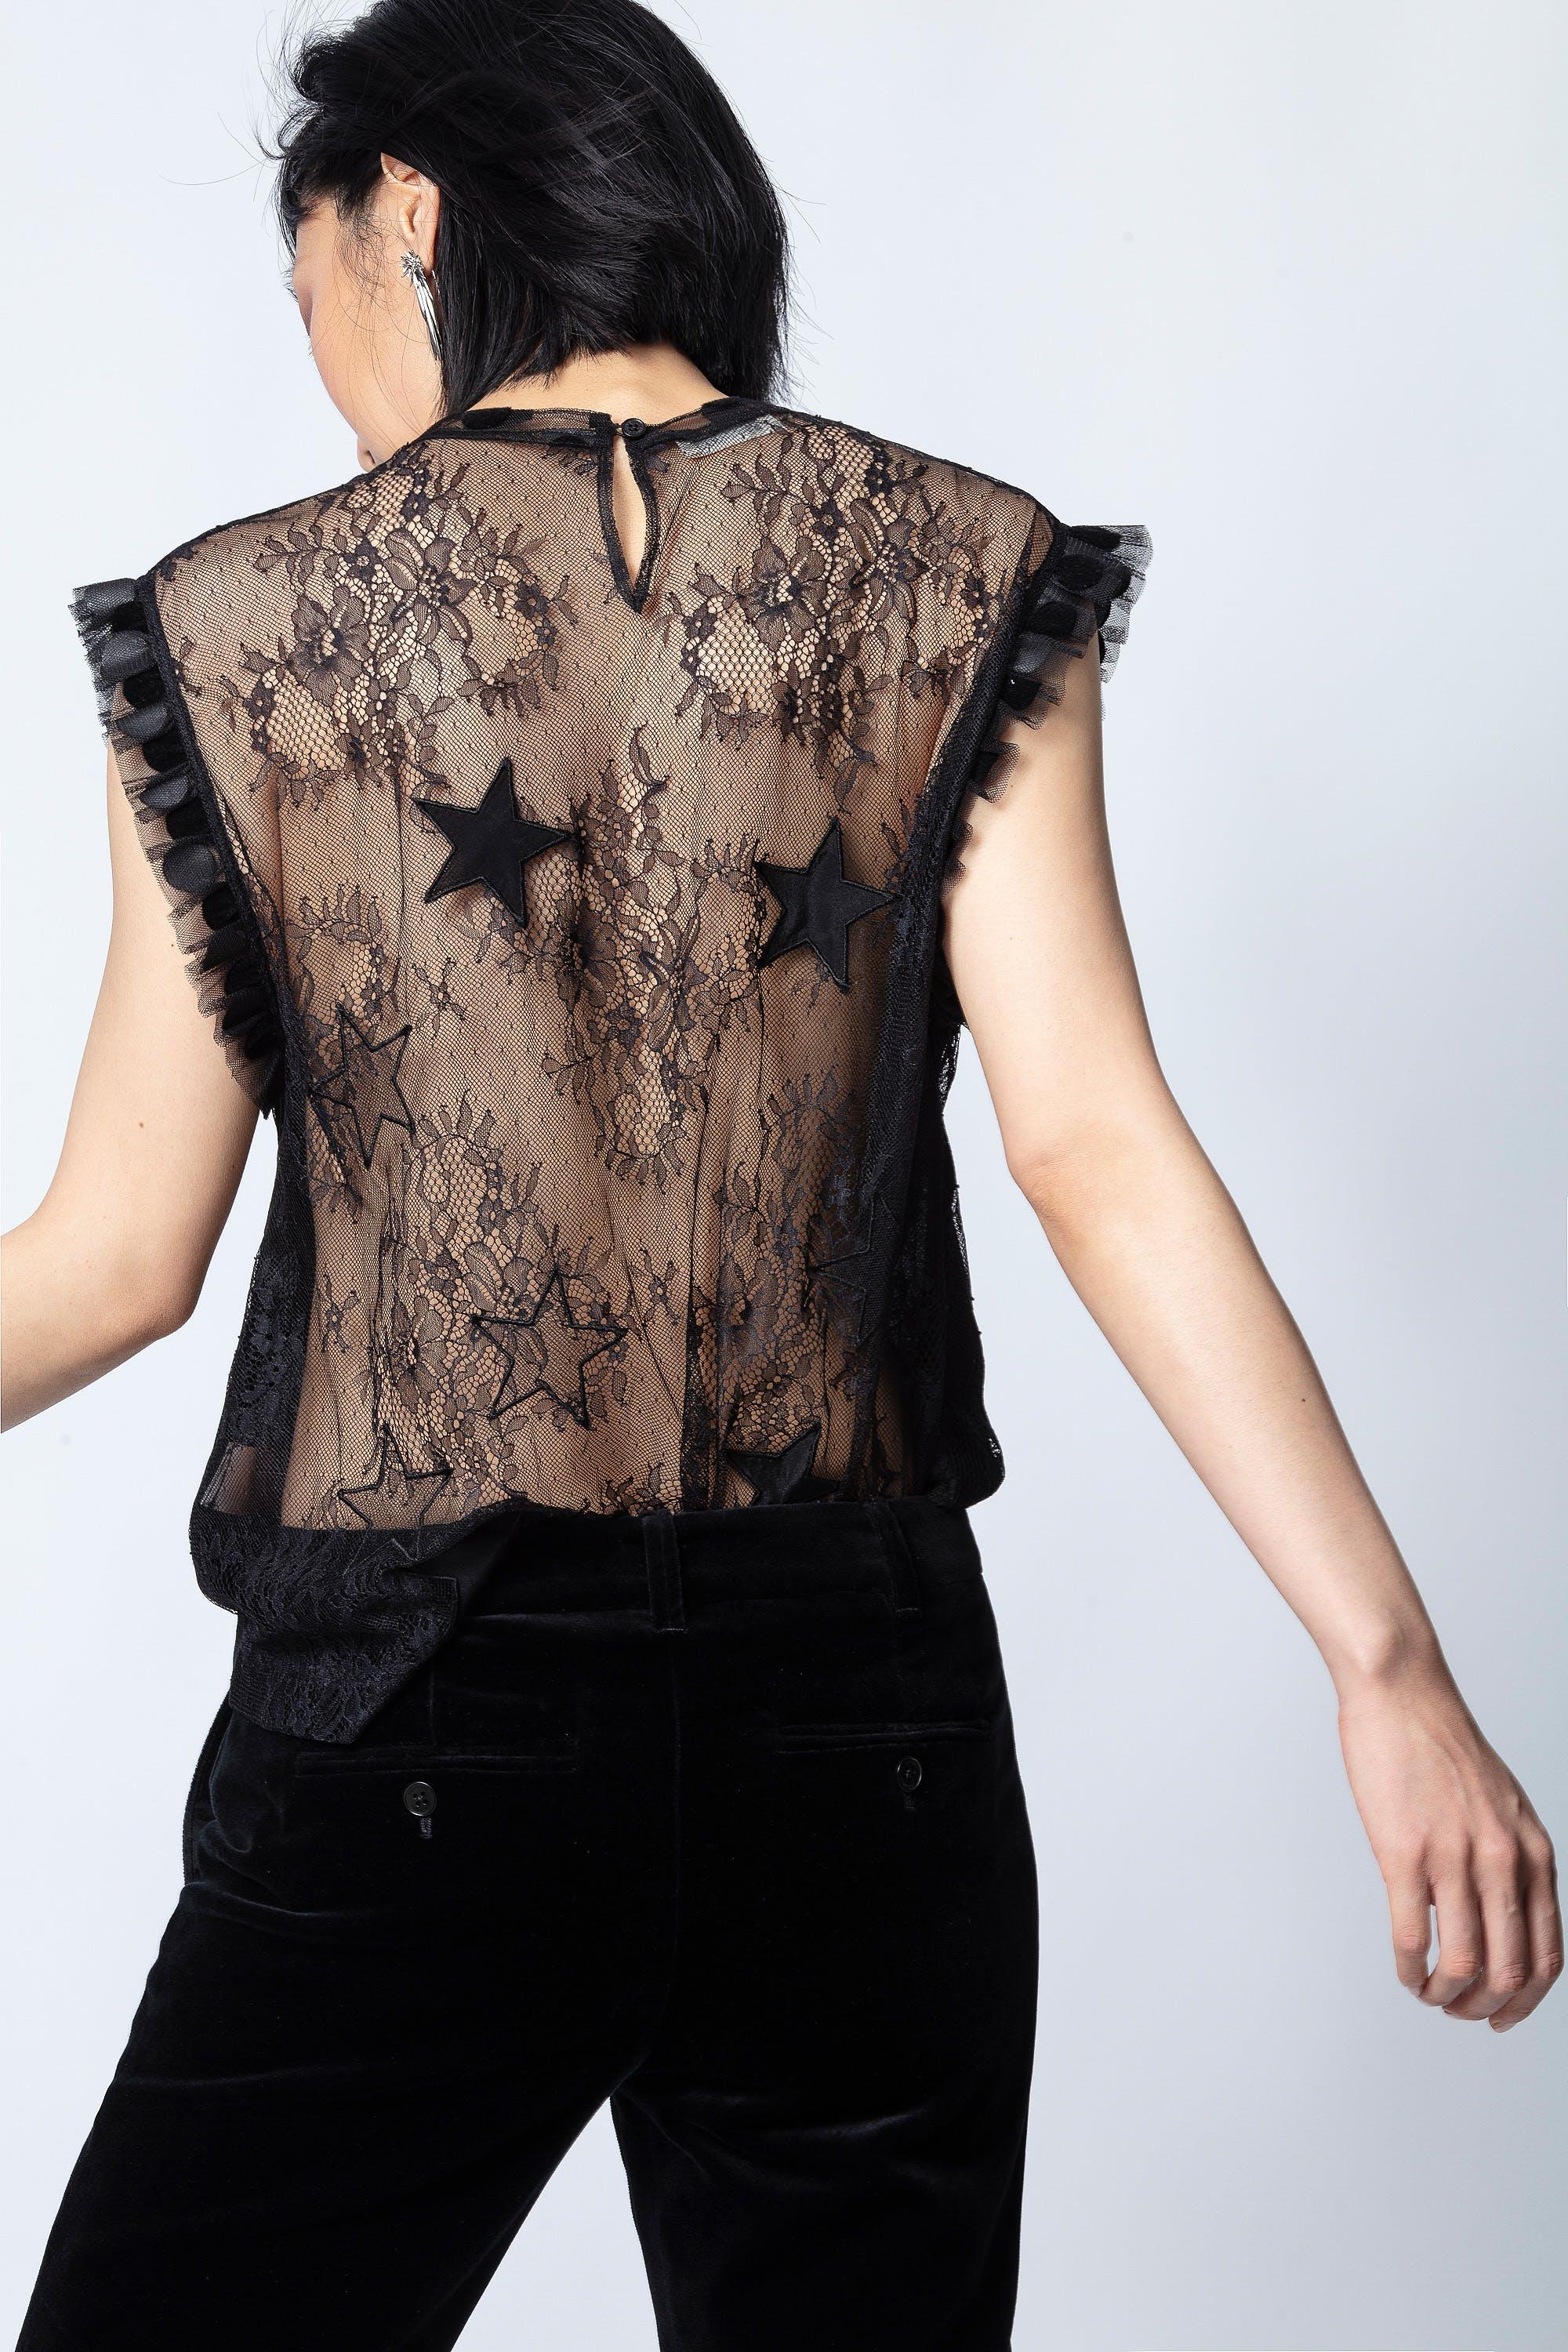 Zadig & Voltaire Tetro Lace Top in Black | Lyst